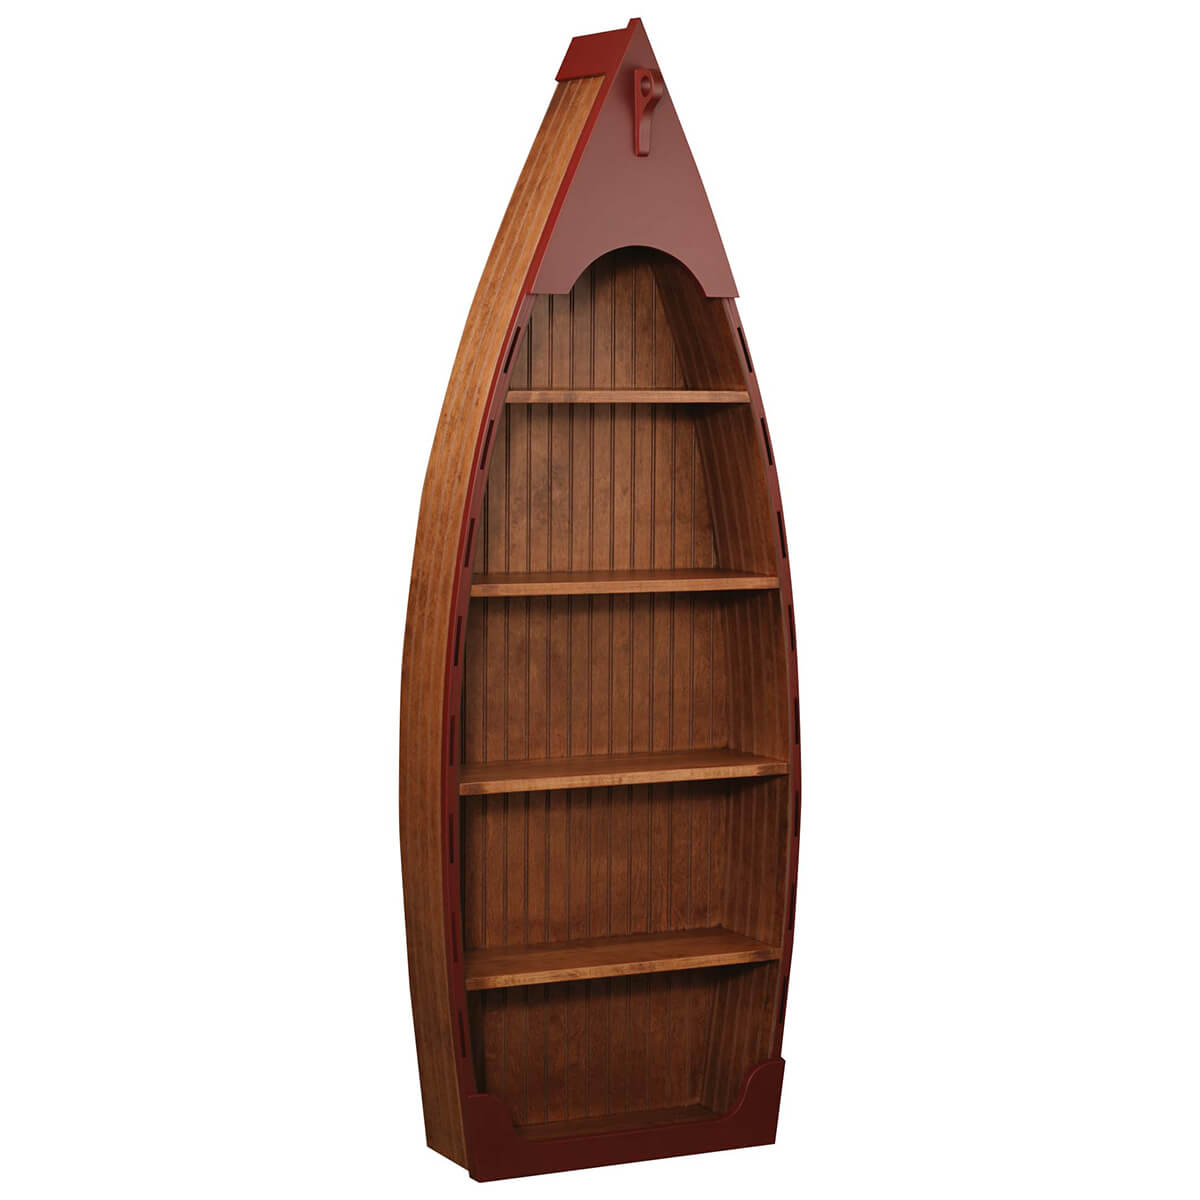 Read more about the article Lake Placid 72 Inch Boat Shelf